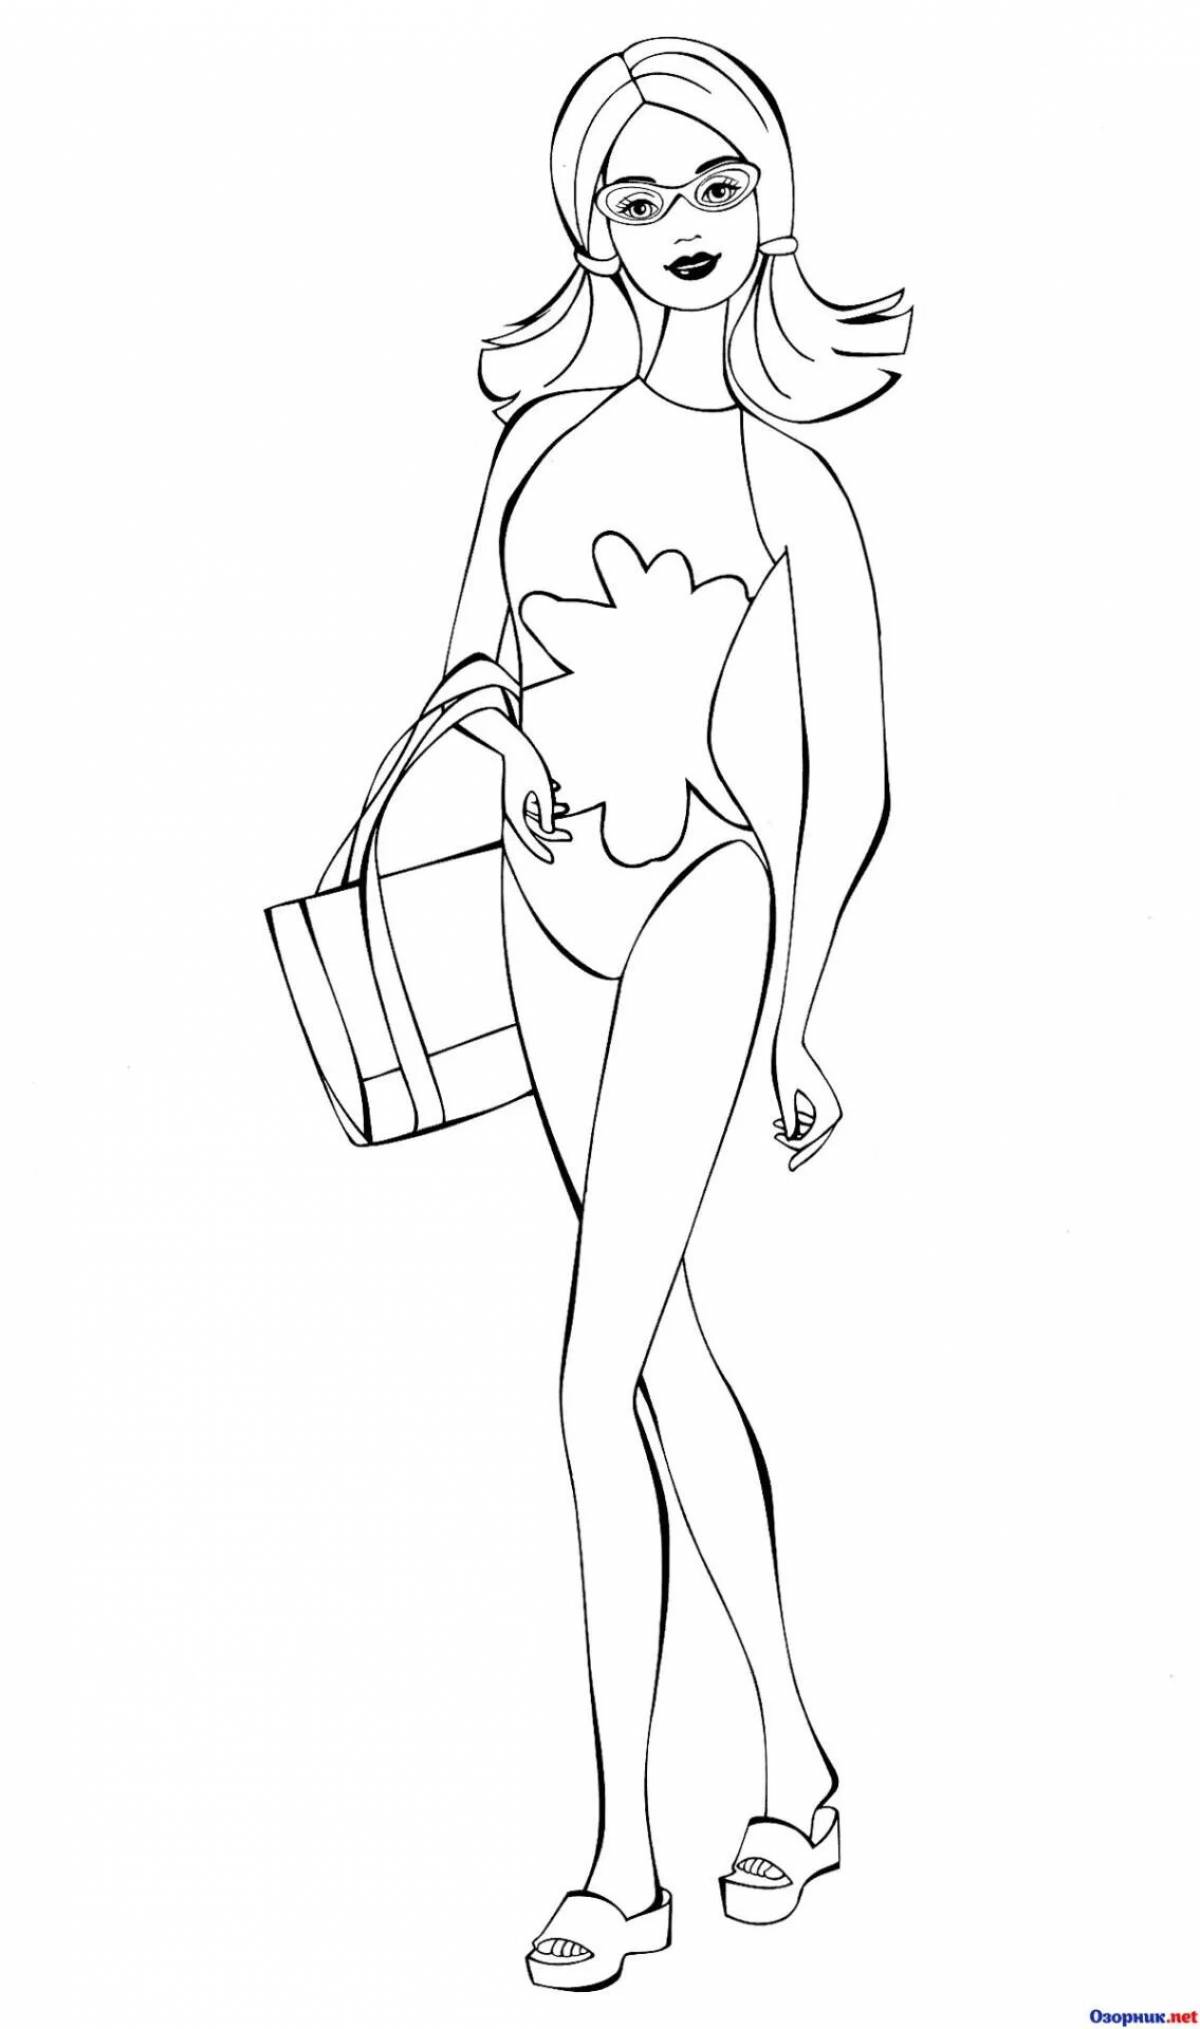 Vivacious coloring page barbie doll in swimsuit